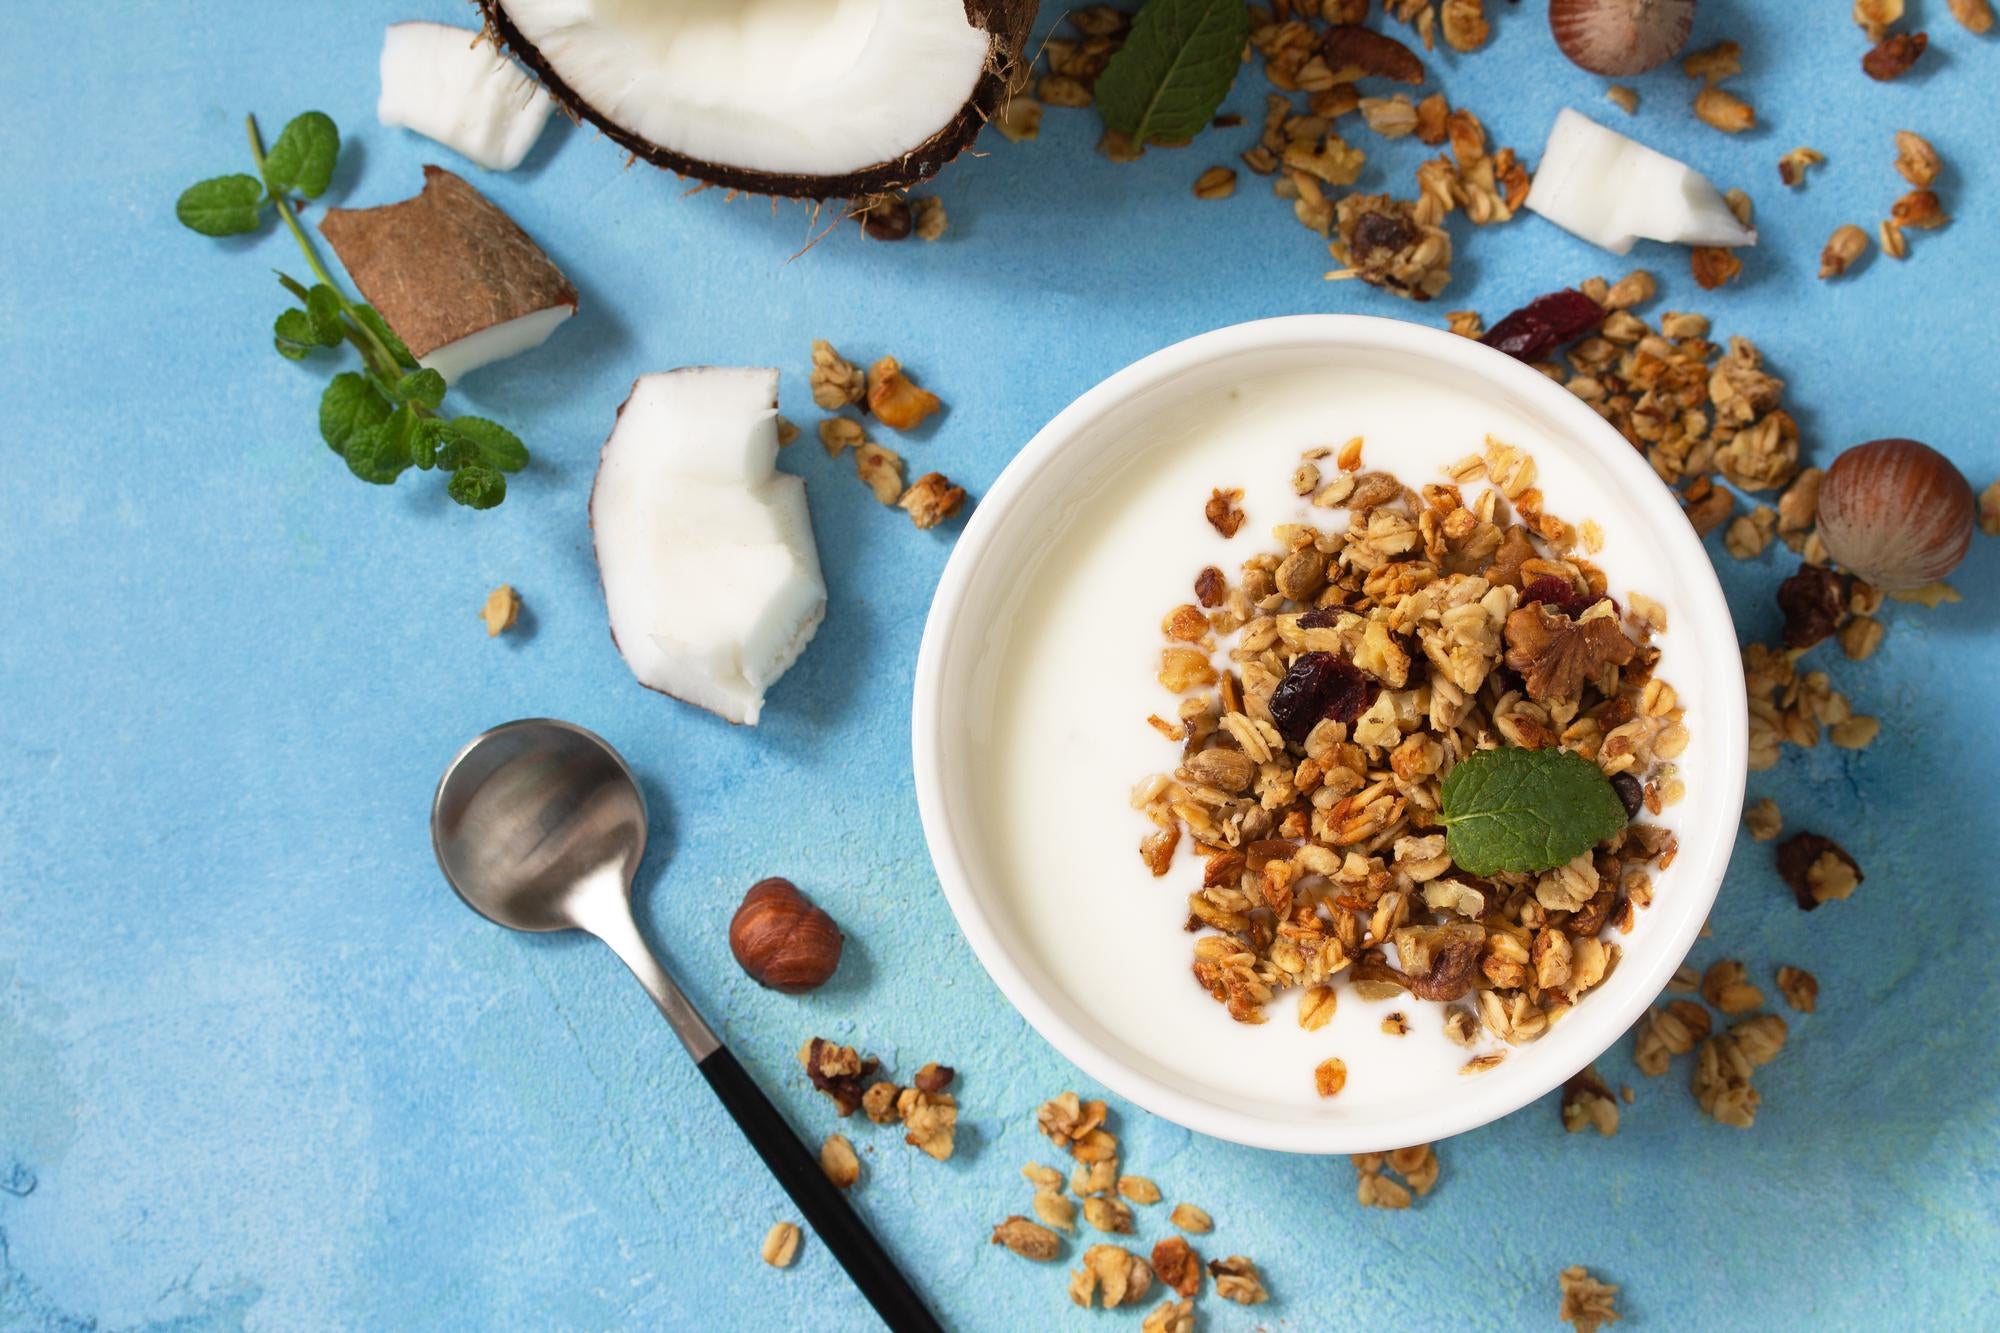 Coconut Almond Granola with Organic Rolled Oats